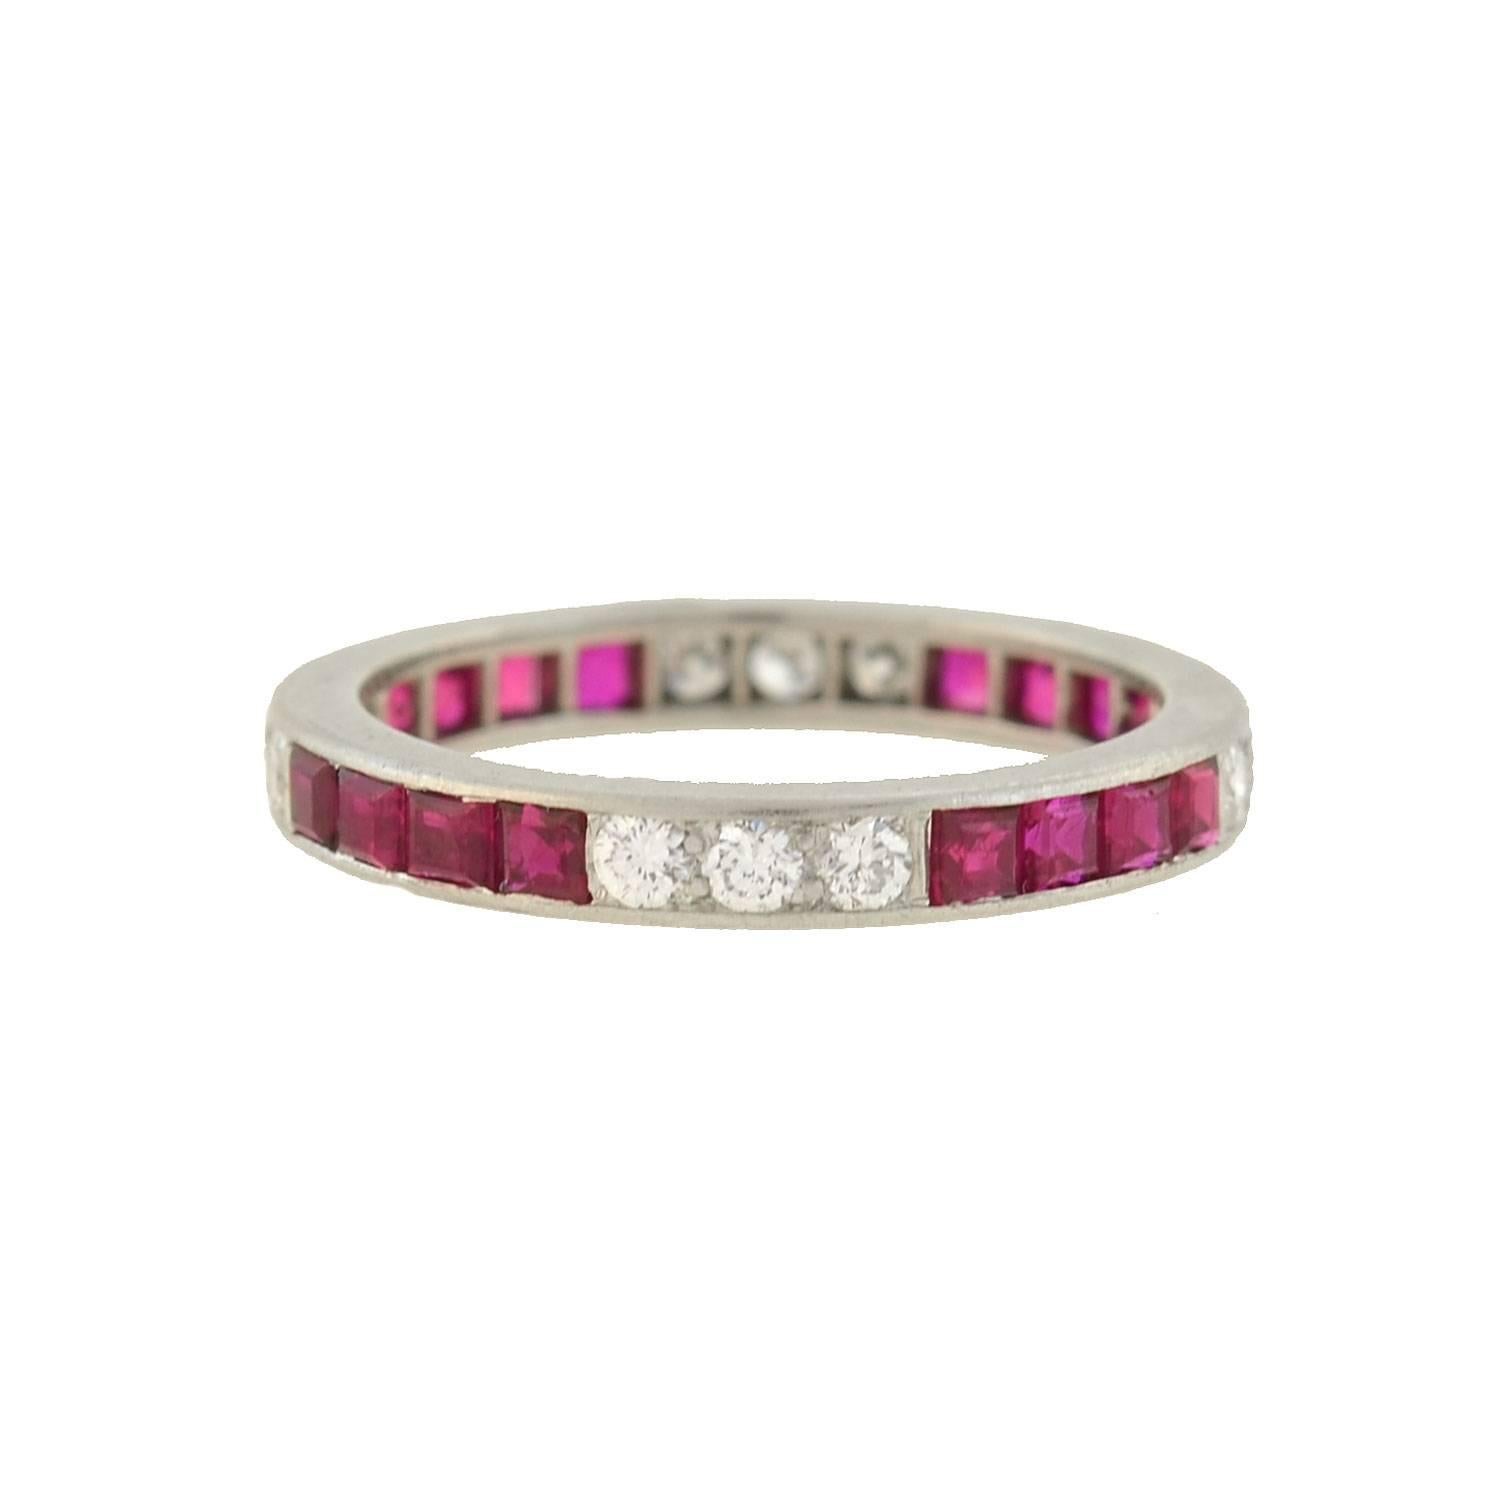 An absolutely gorgeous diamond and ruby eternity band by legendary maker Tiffany & Co. from the late Art Deco (ca1930s) era! Crafted in platinum, this feminine band is comprised of a pattern of three Round Cut diamonds and four calibrated Square Cut